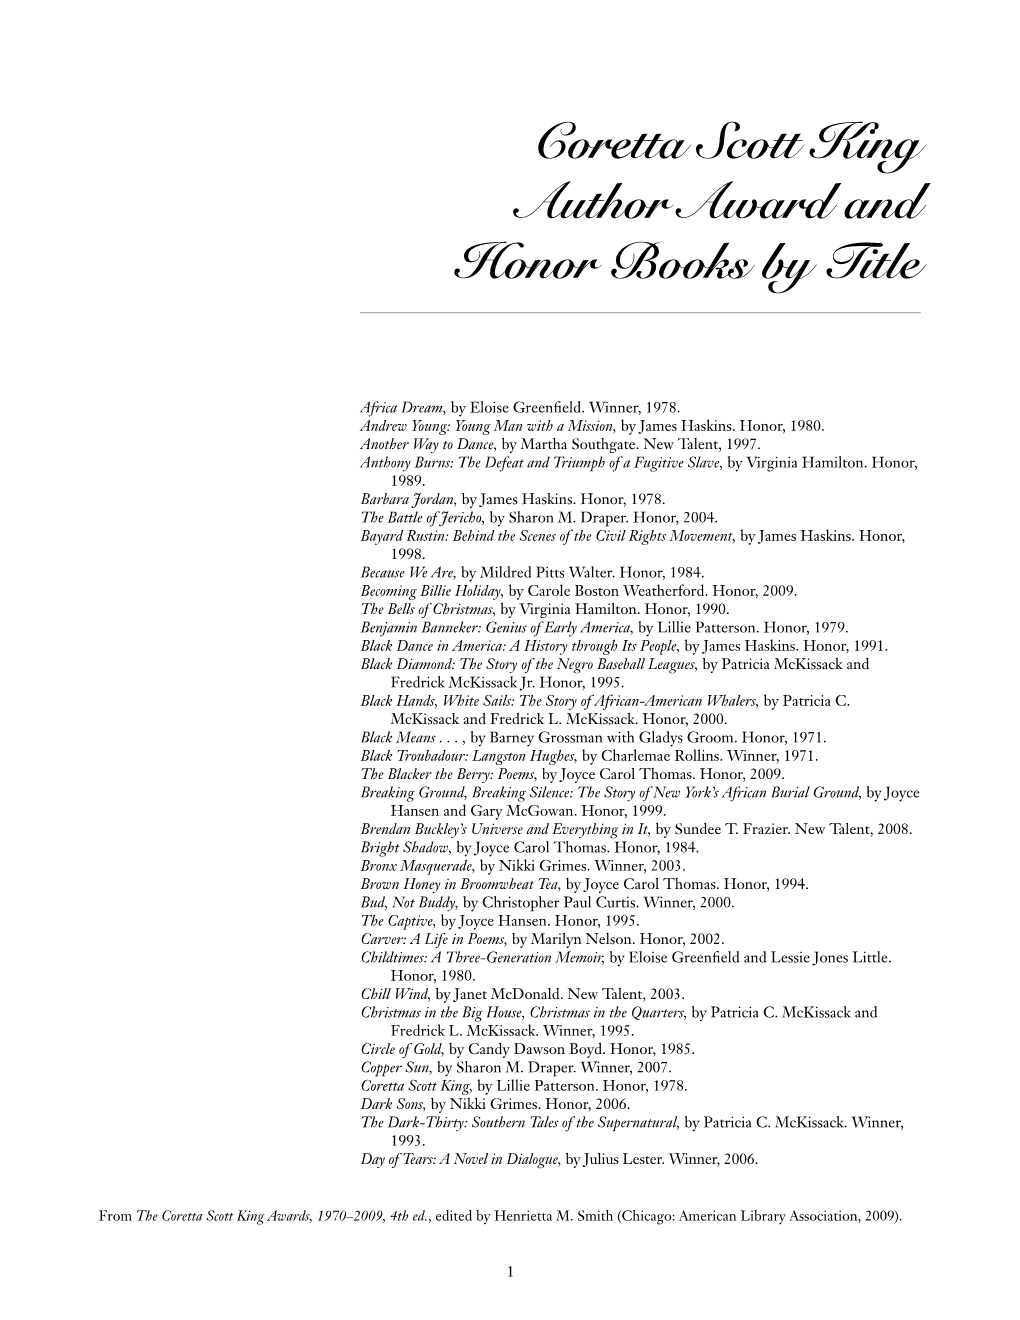 List of Coretta Scott King Author Award and Honor Books by Title, 1970-2009